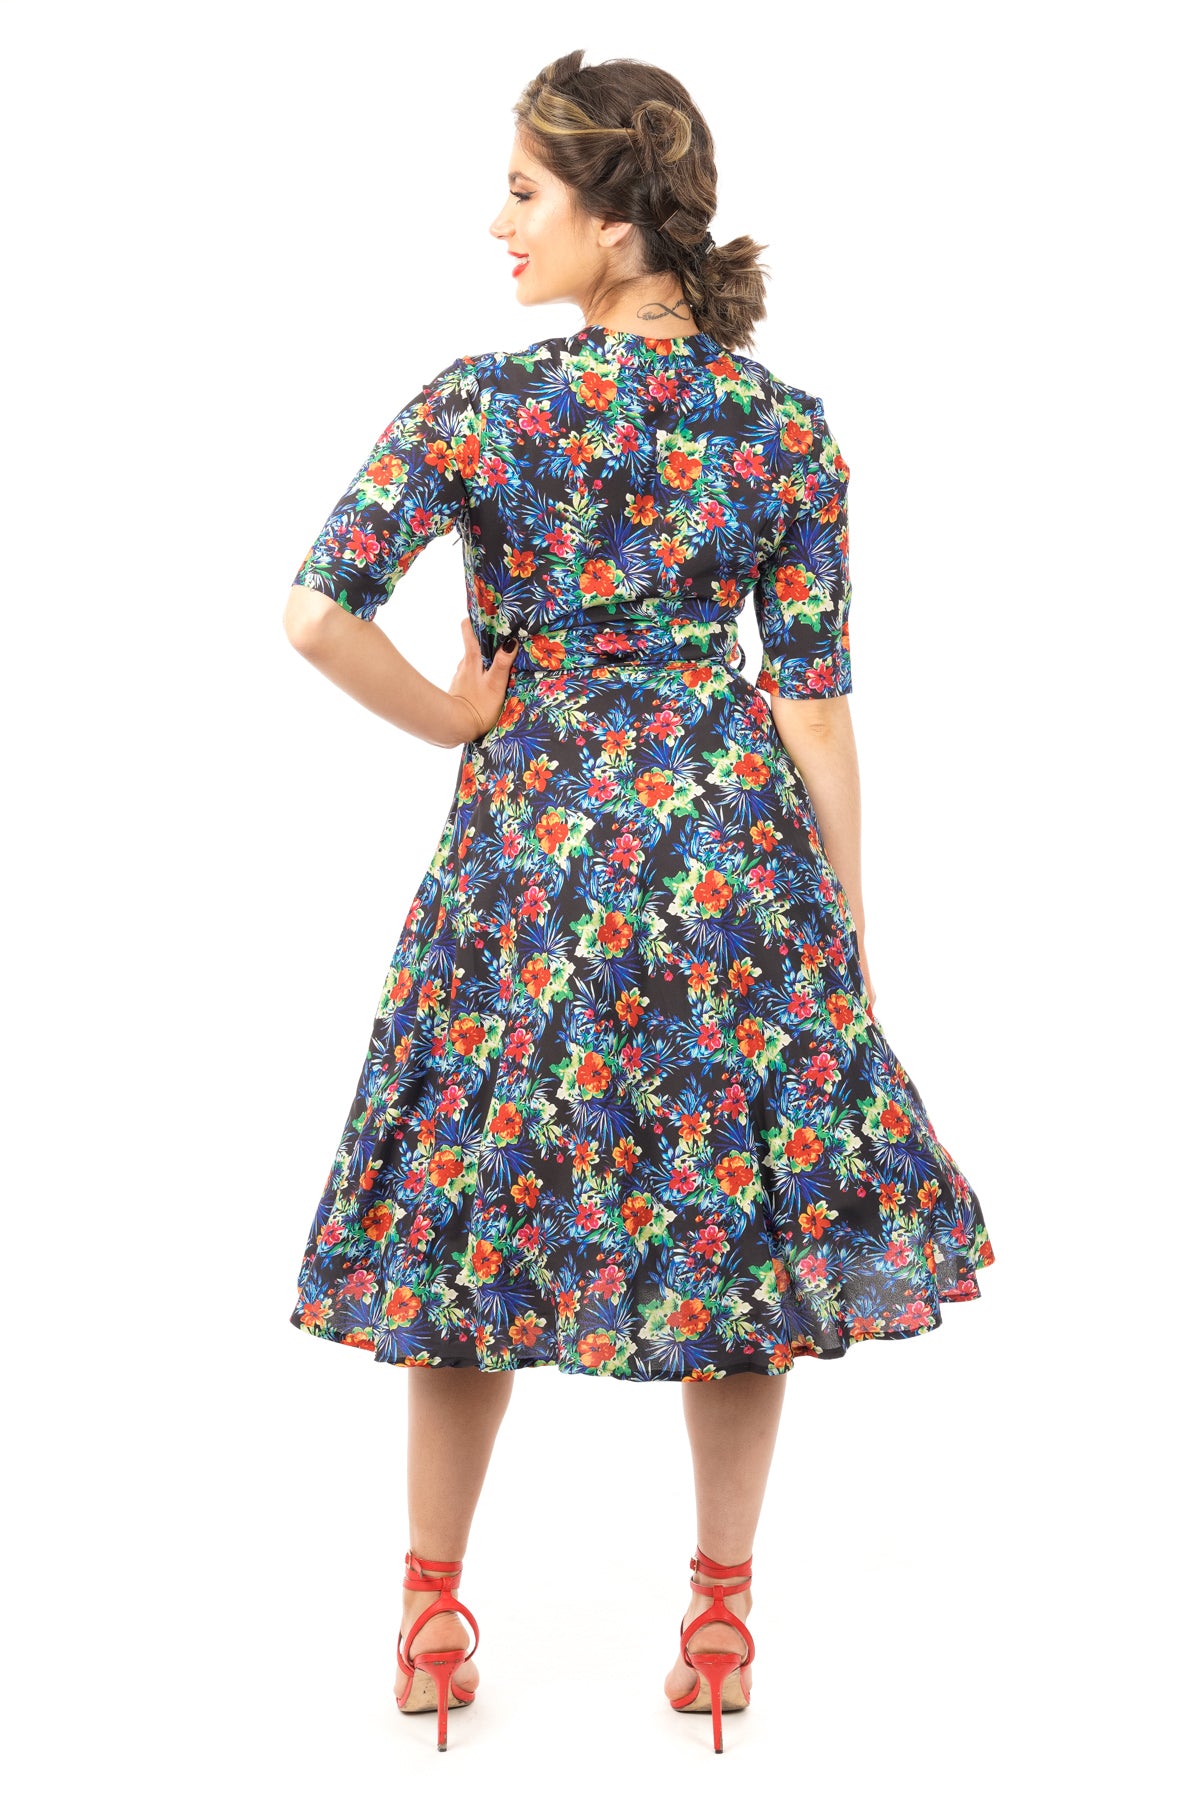 Retro Vintage inspired 1950's Midi Floral Shirt Dress In Black - Pack of 10